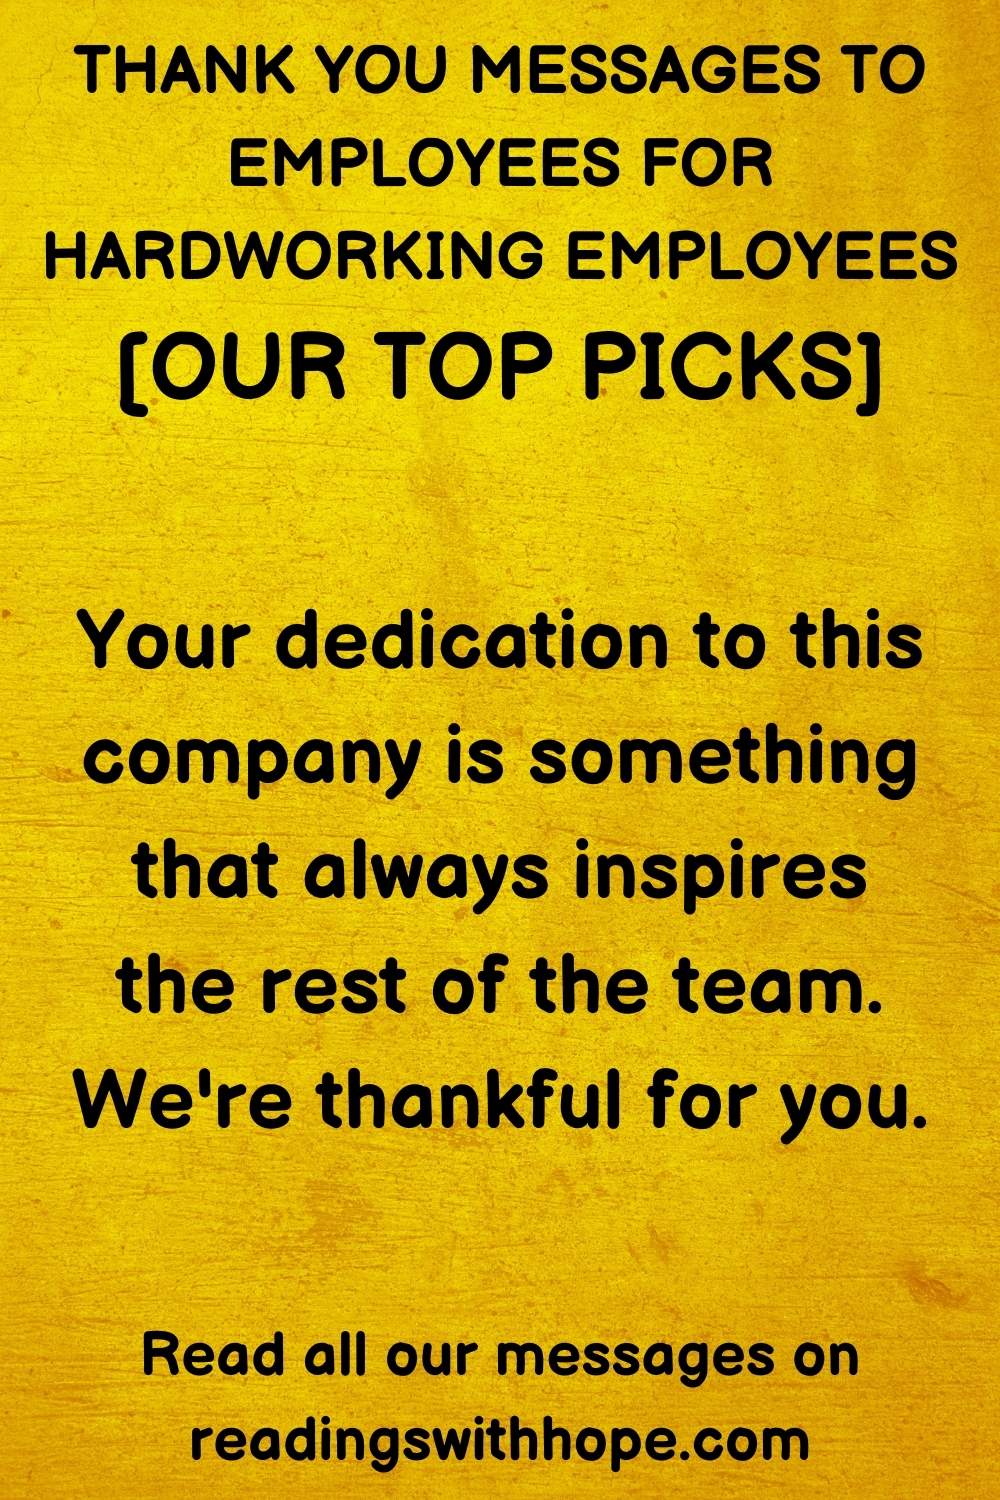 Special Thank You Messages to Employees for Hard Work